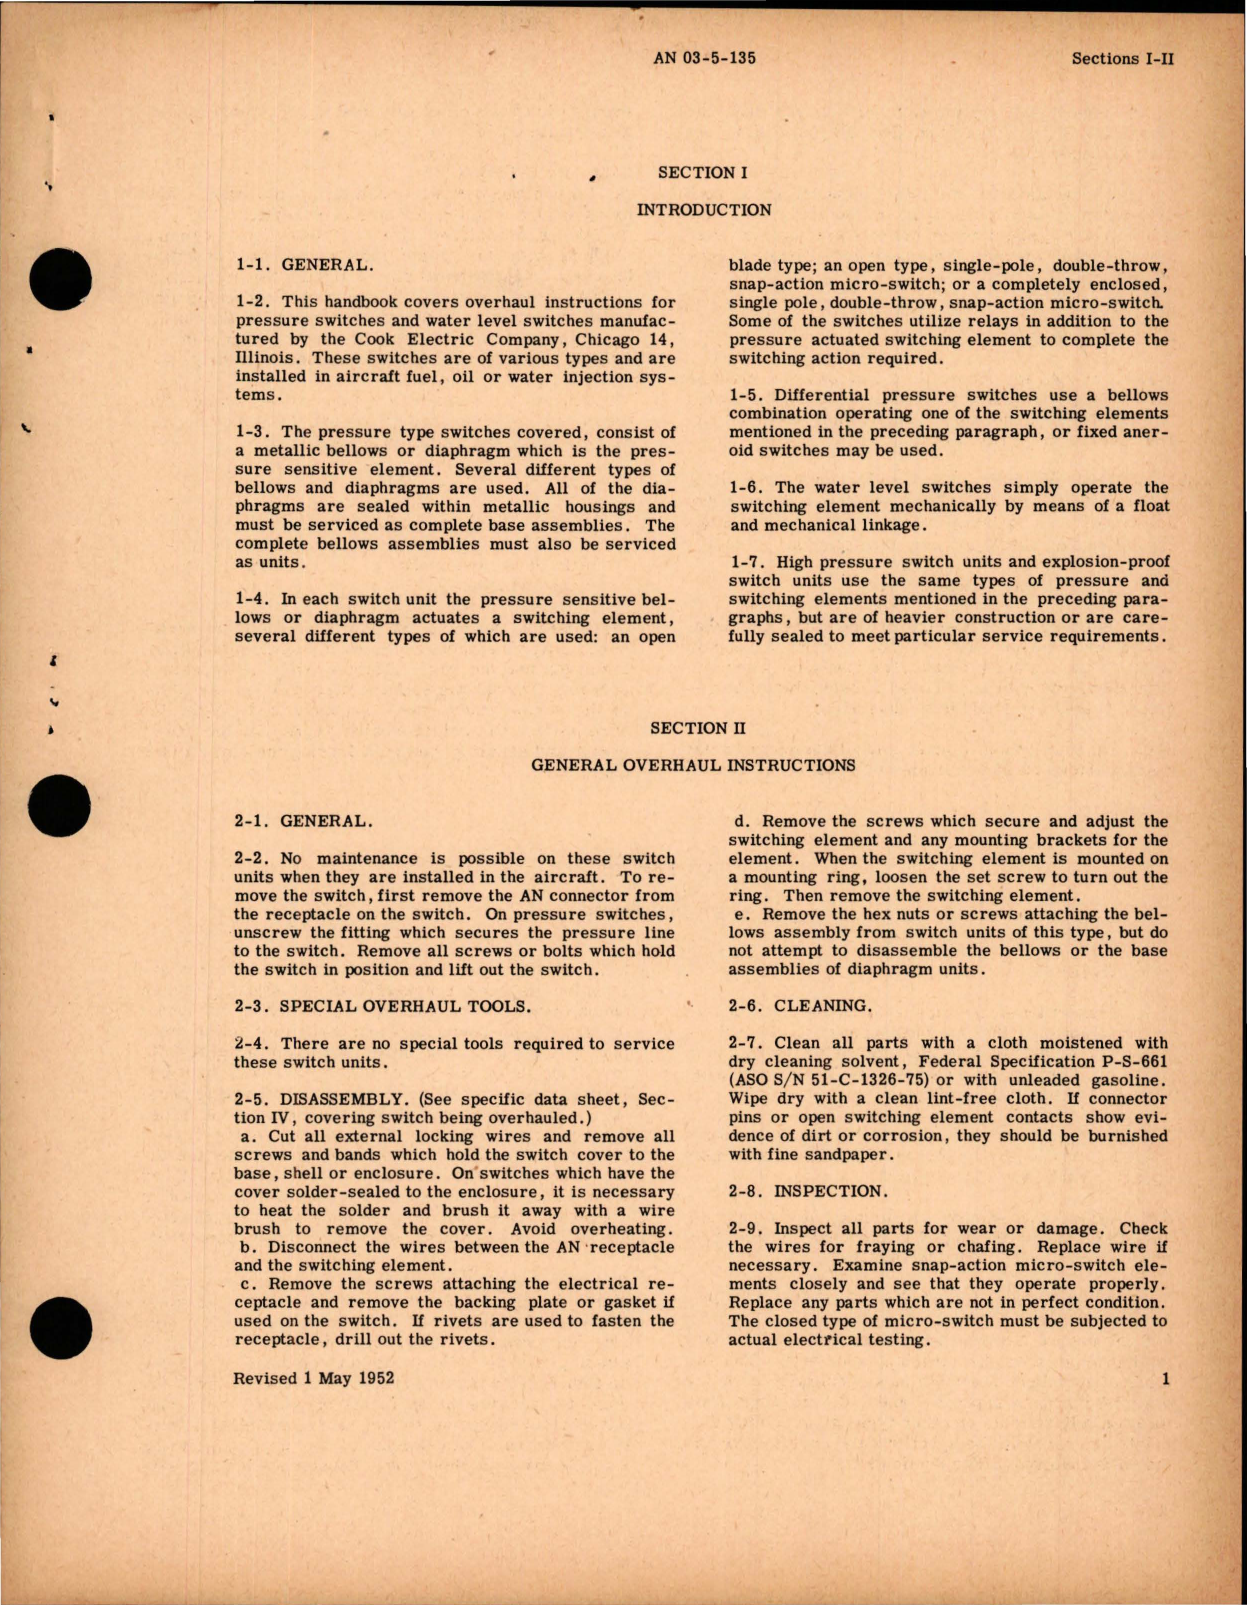 Sample page 5 from AirCorps Library document: Overhaul Instructions for Pressure Control Switches 